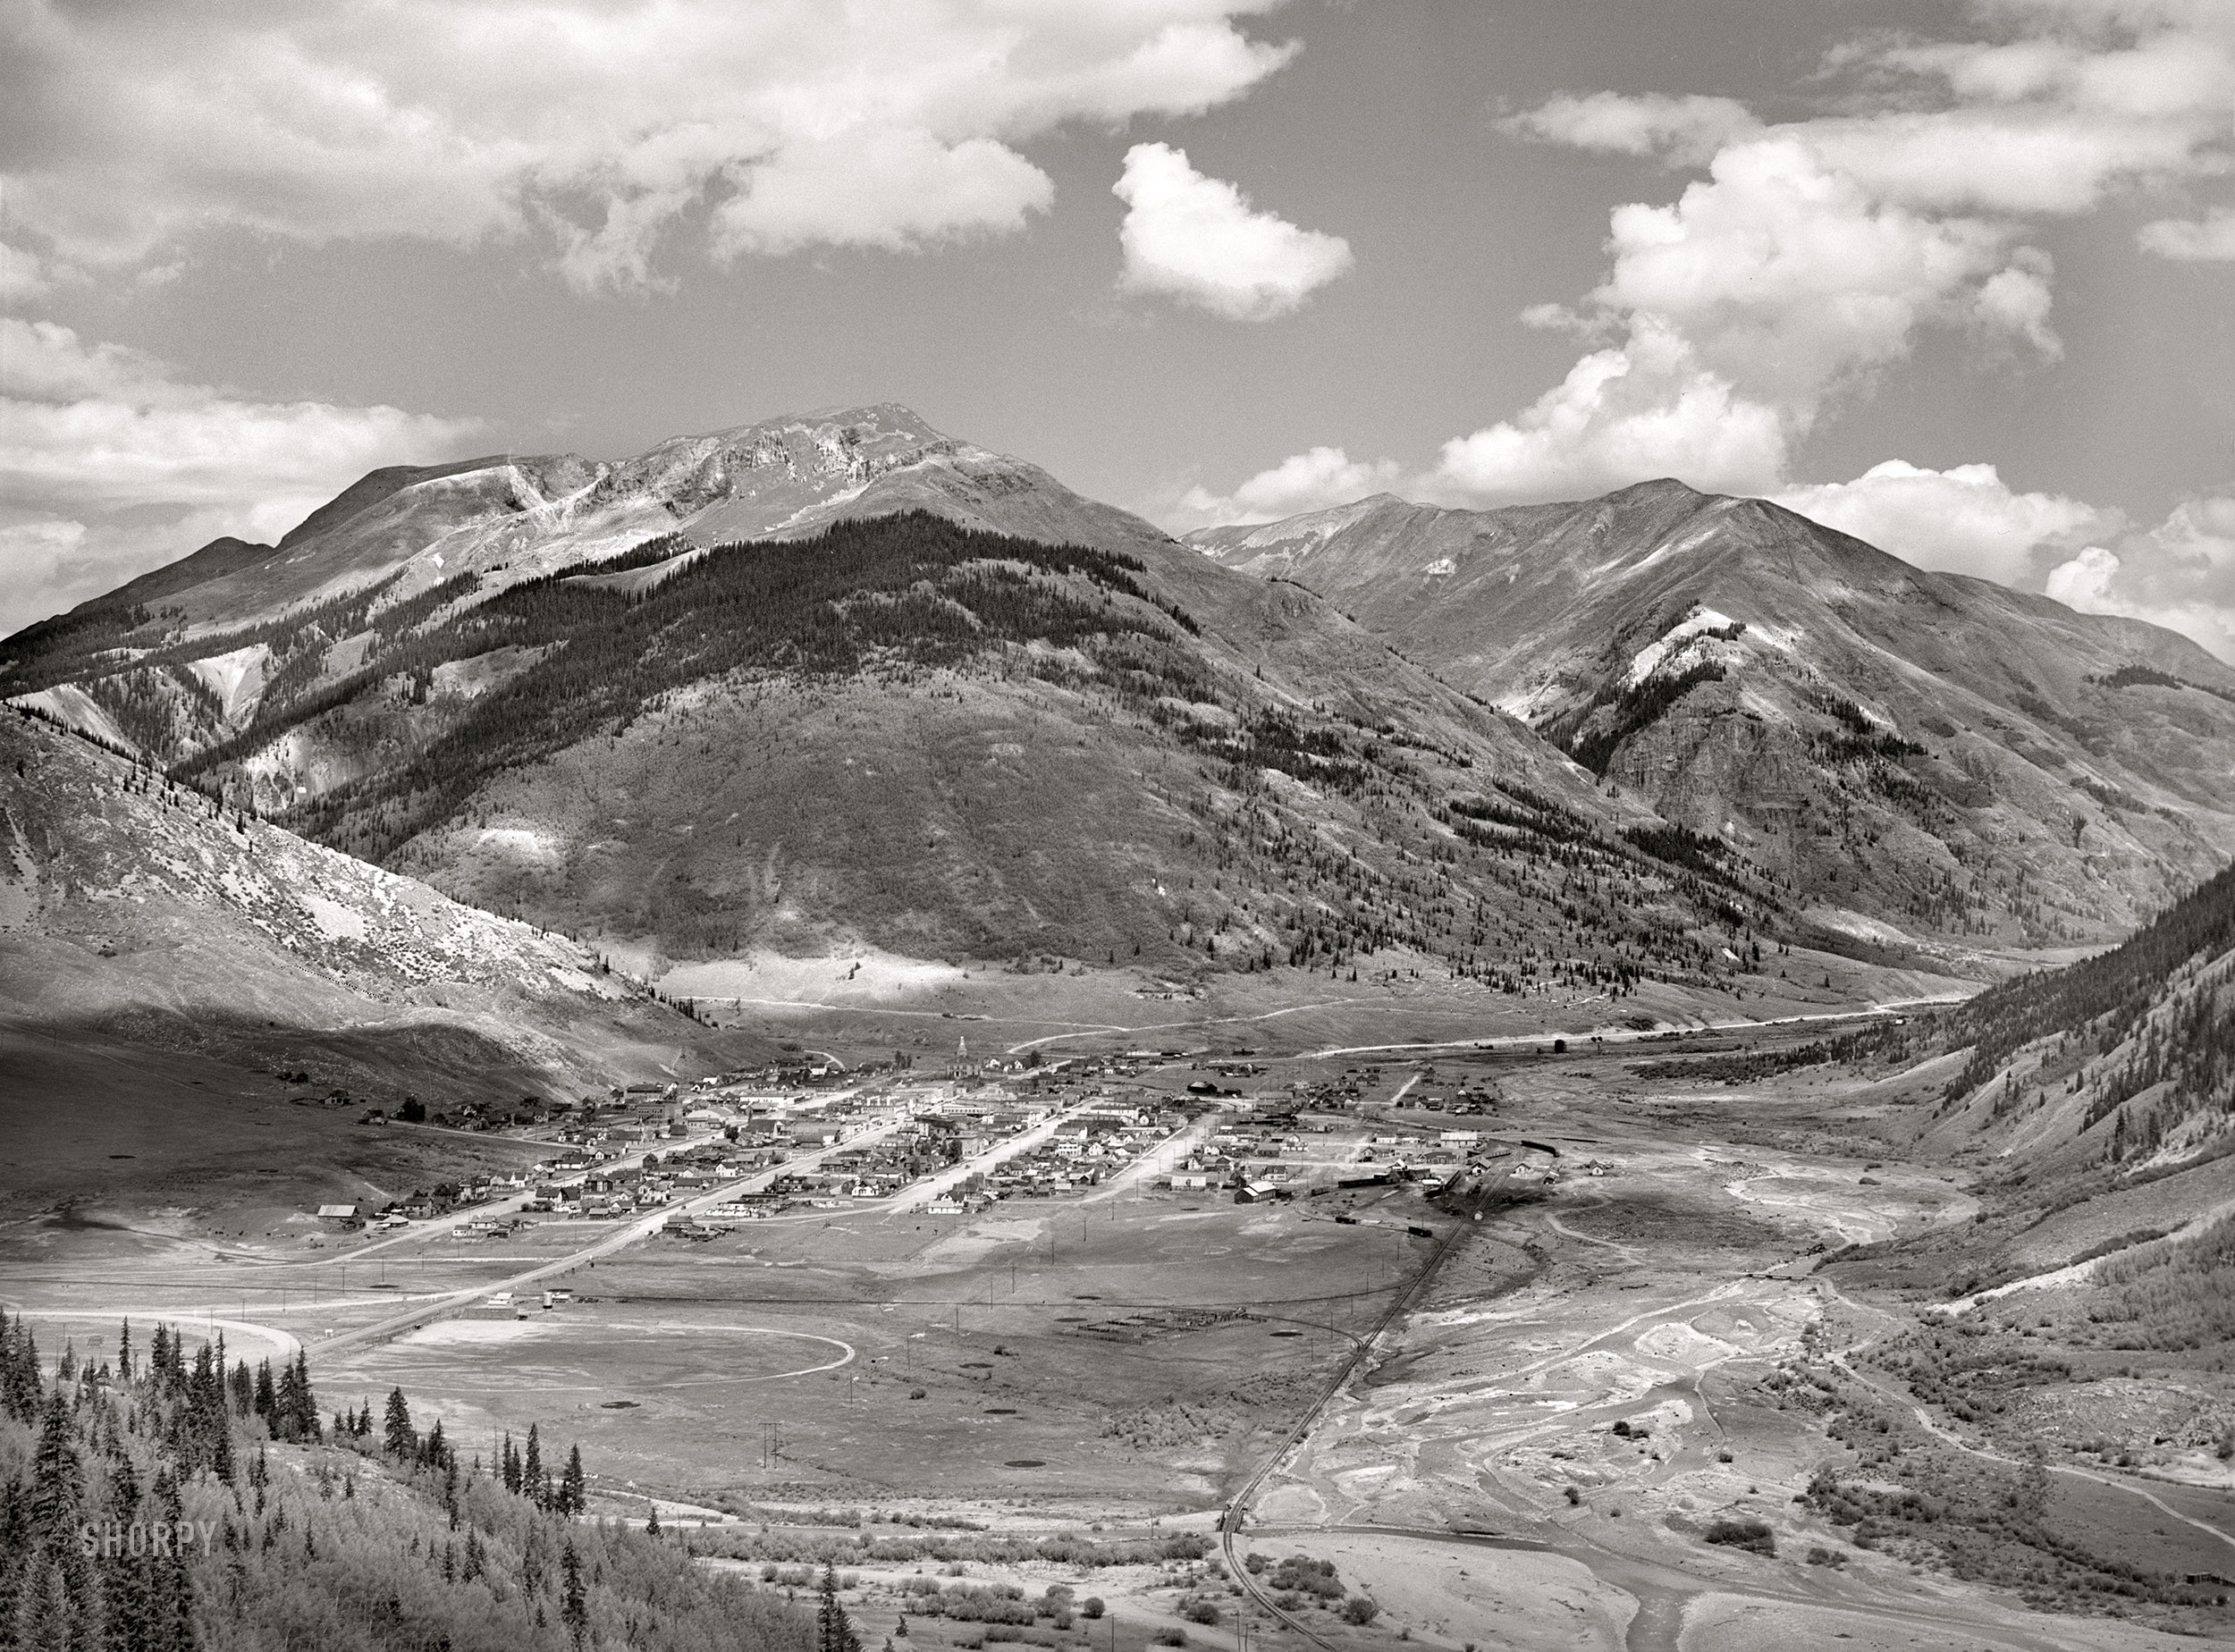 September 1940. "Silverton, Colorado, lies in a valley at 9,400 feet elevation. This has been a center for mining and milling operations, and the tailing-choked Animas River can be seen at right." Acetate negative by Russell Lee for the Farm Security Administration. View full size.